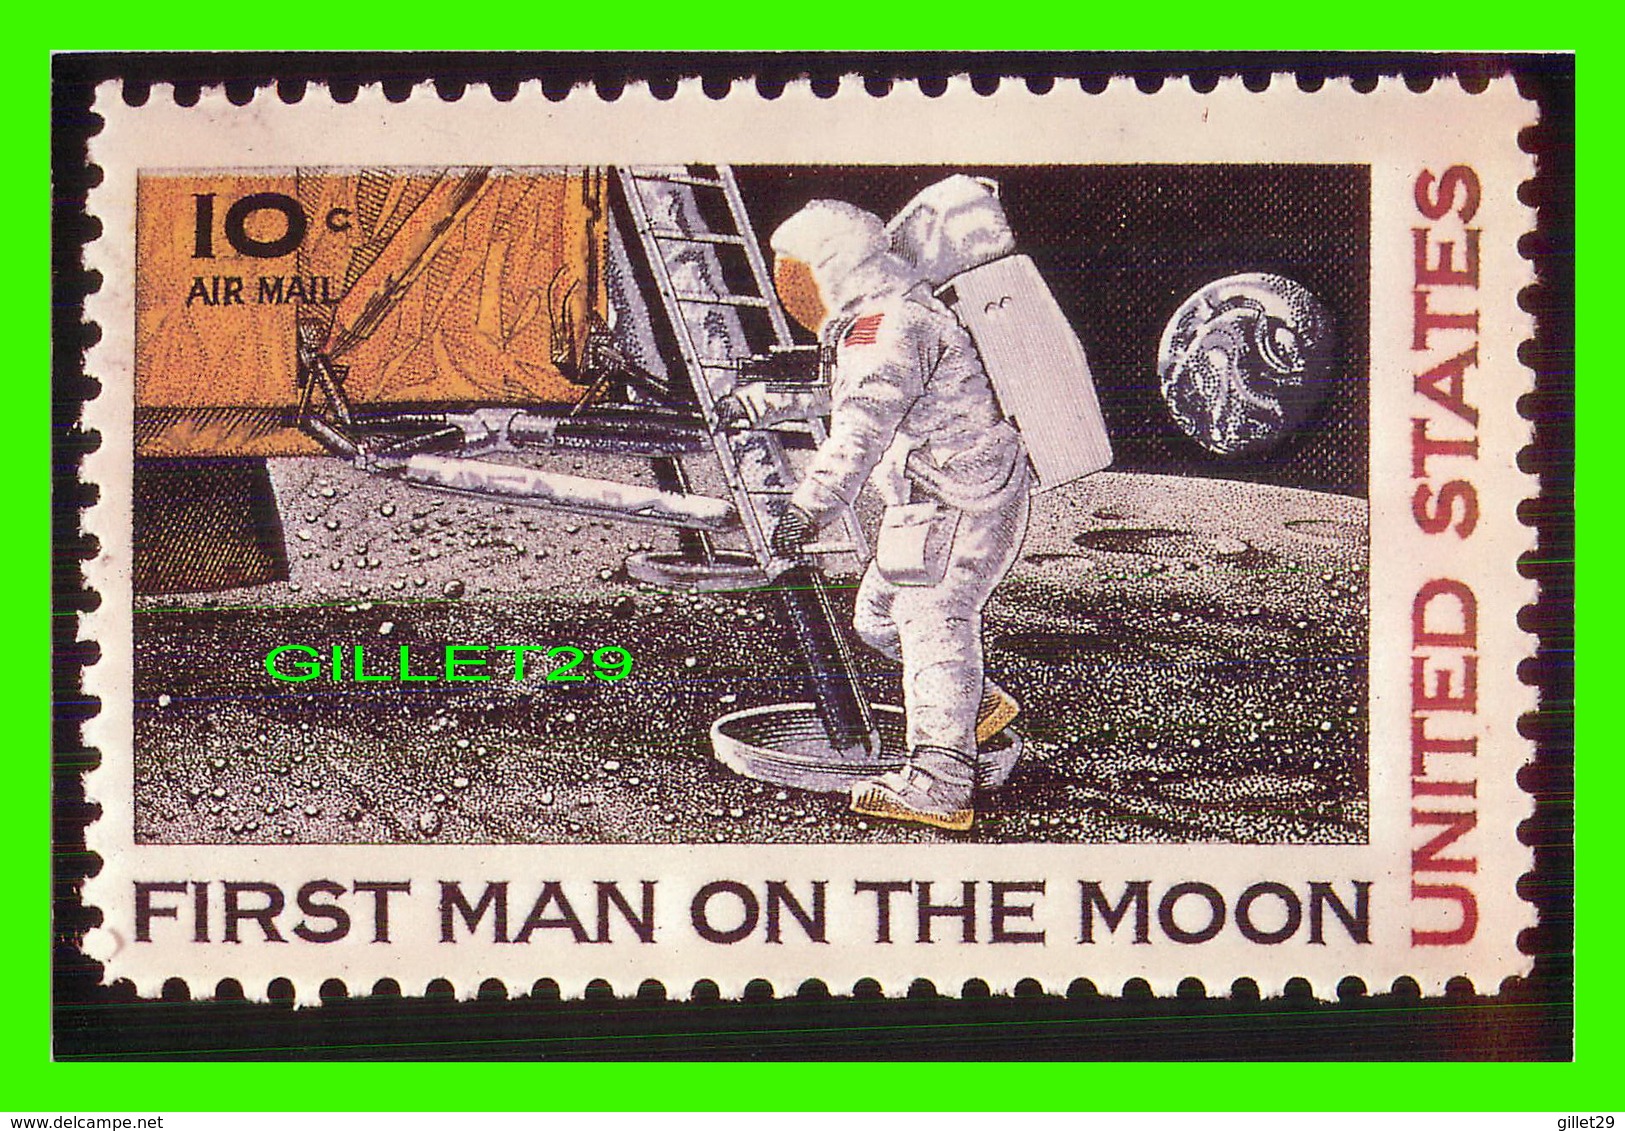 LA POSTE - UNITED STATES POSTAL SERVICES - FIRST MAN ON THE MOON, 10c AIR MAIL STAMP - NATIONAL MUSEUM 1991 - - Postal Services